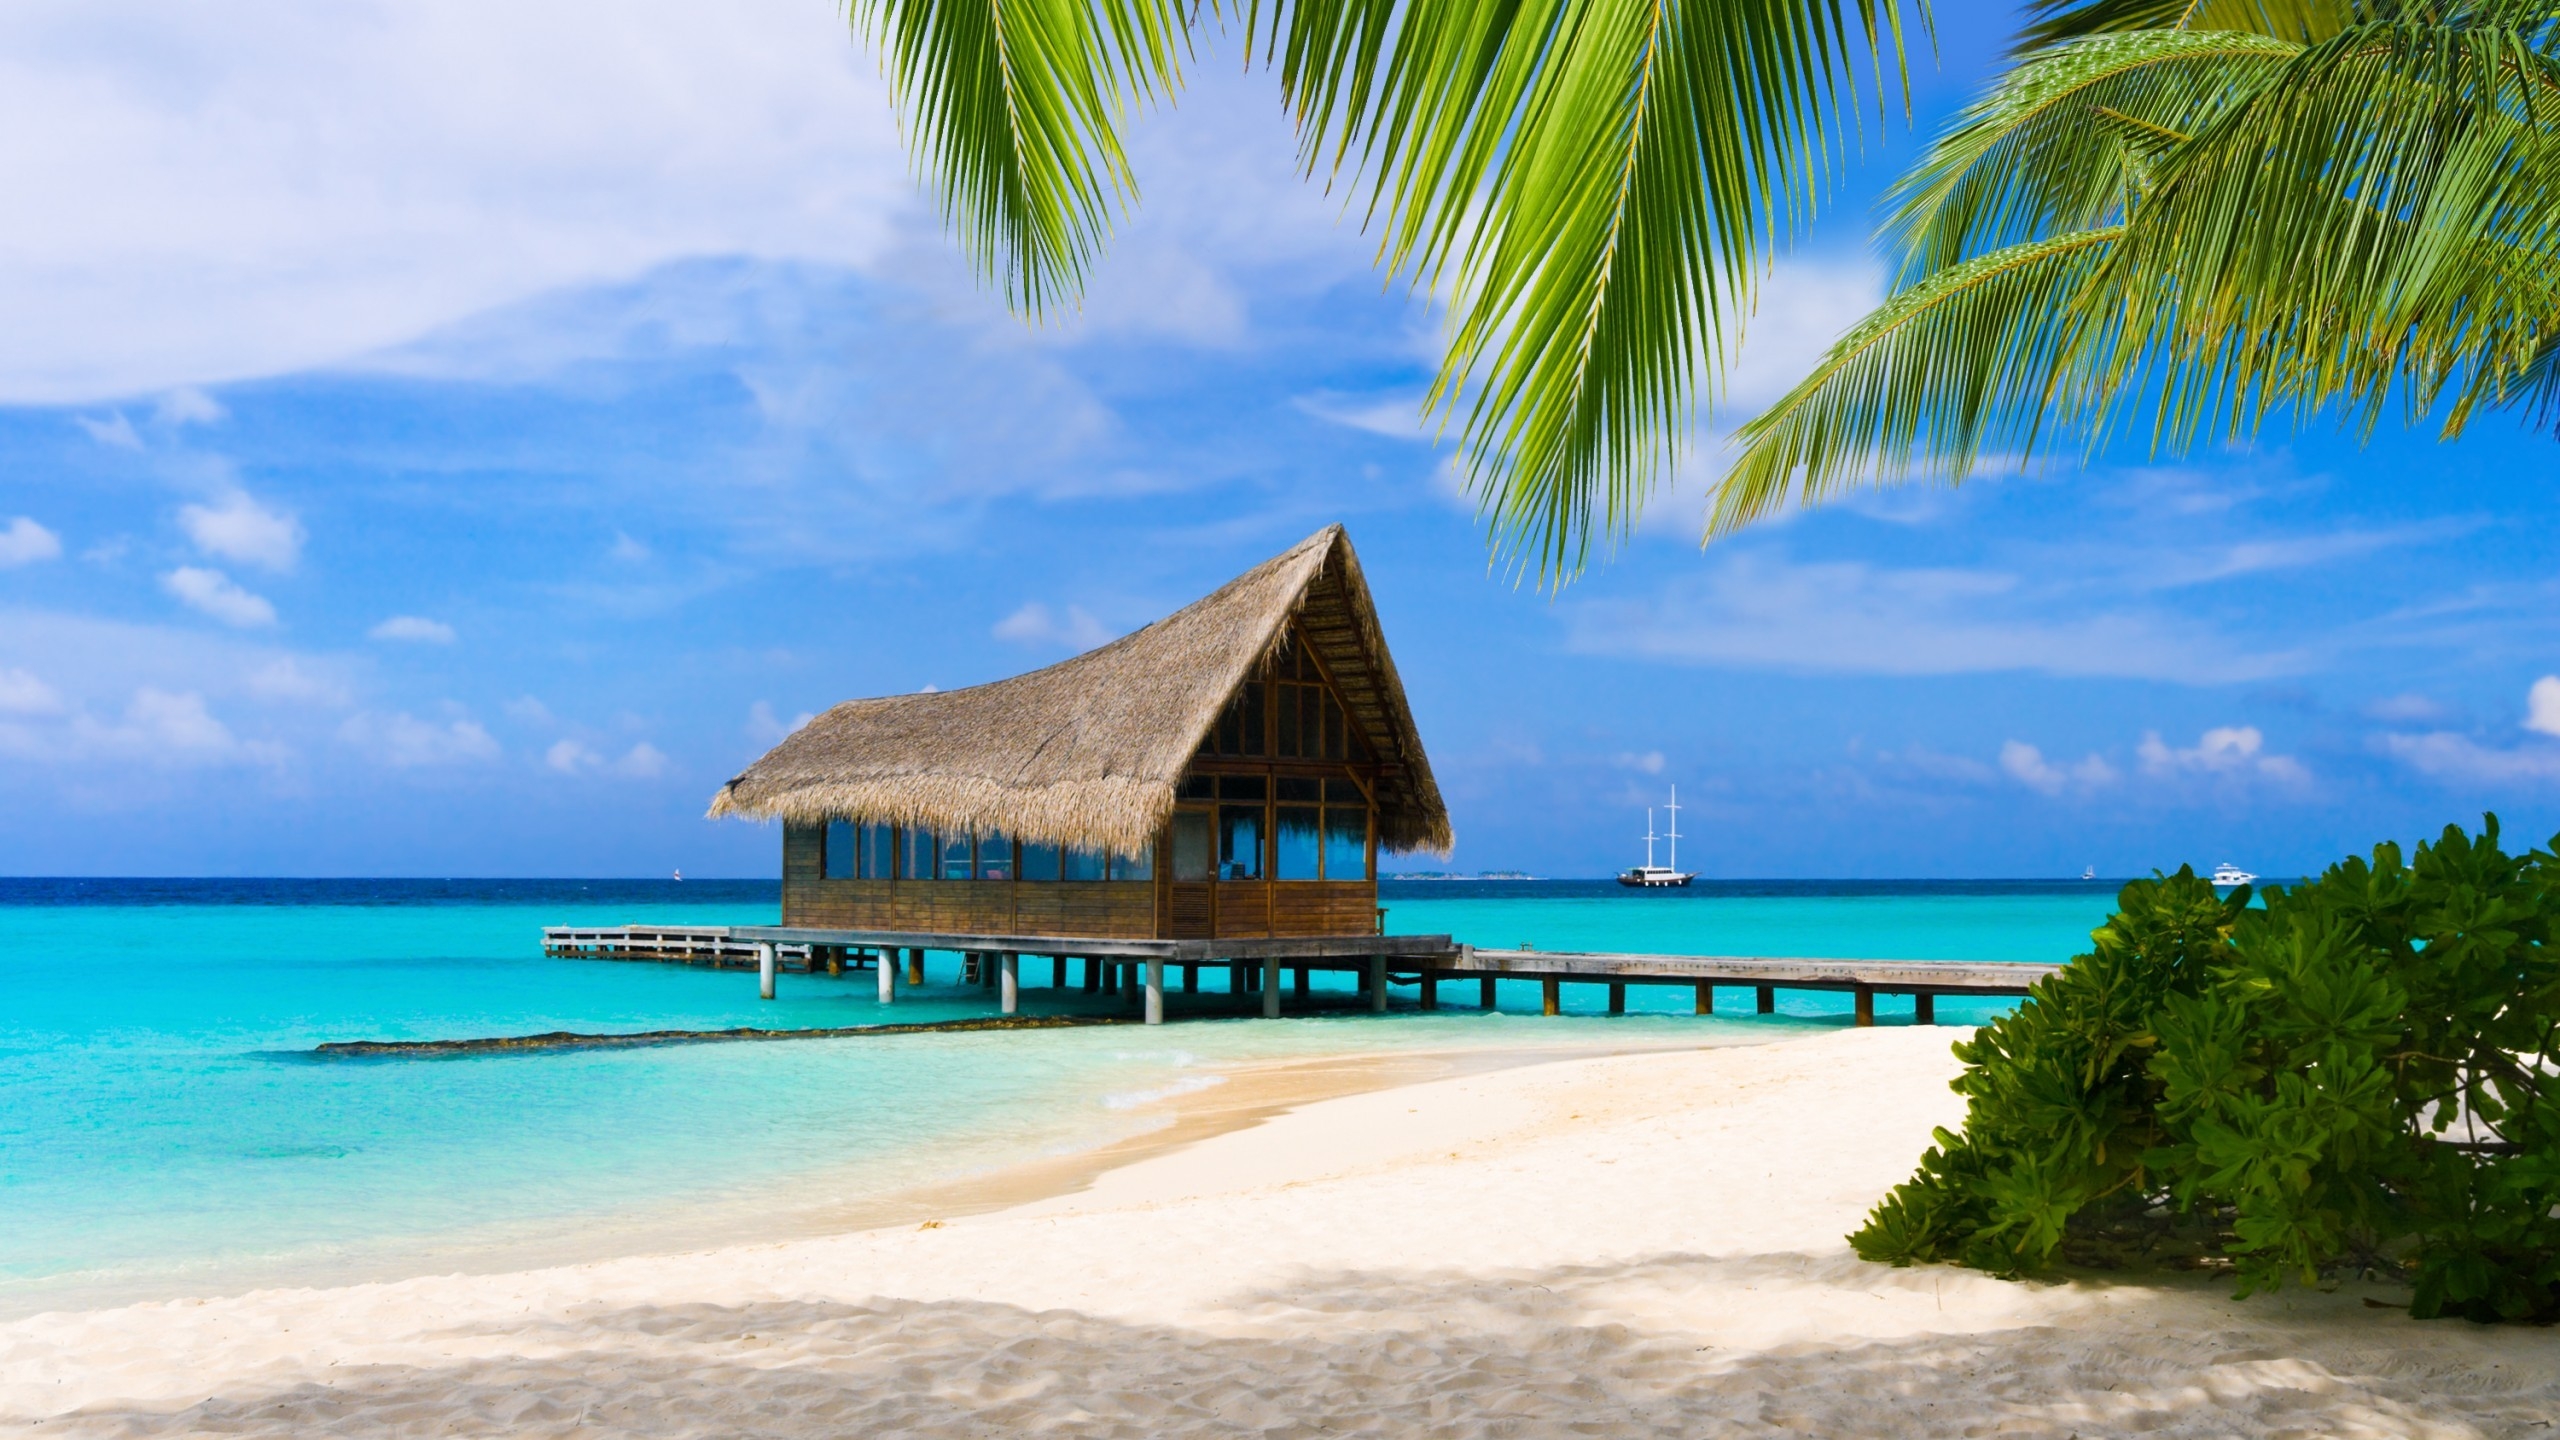 Bungalow in Maldives for 2560x1440 HDTV resolution